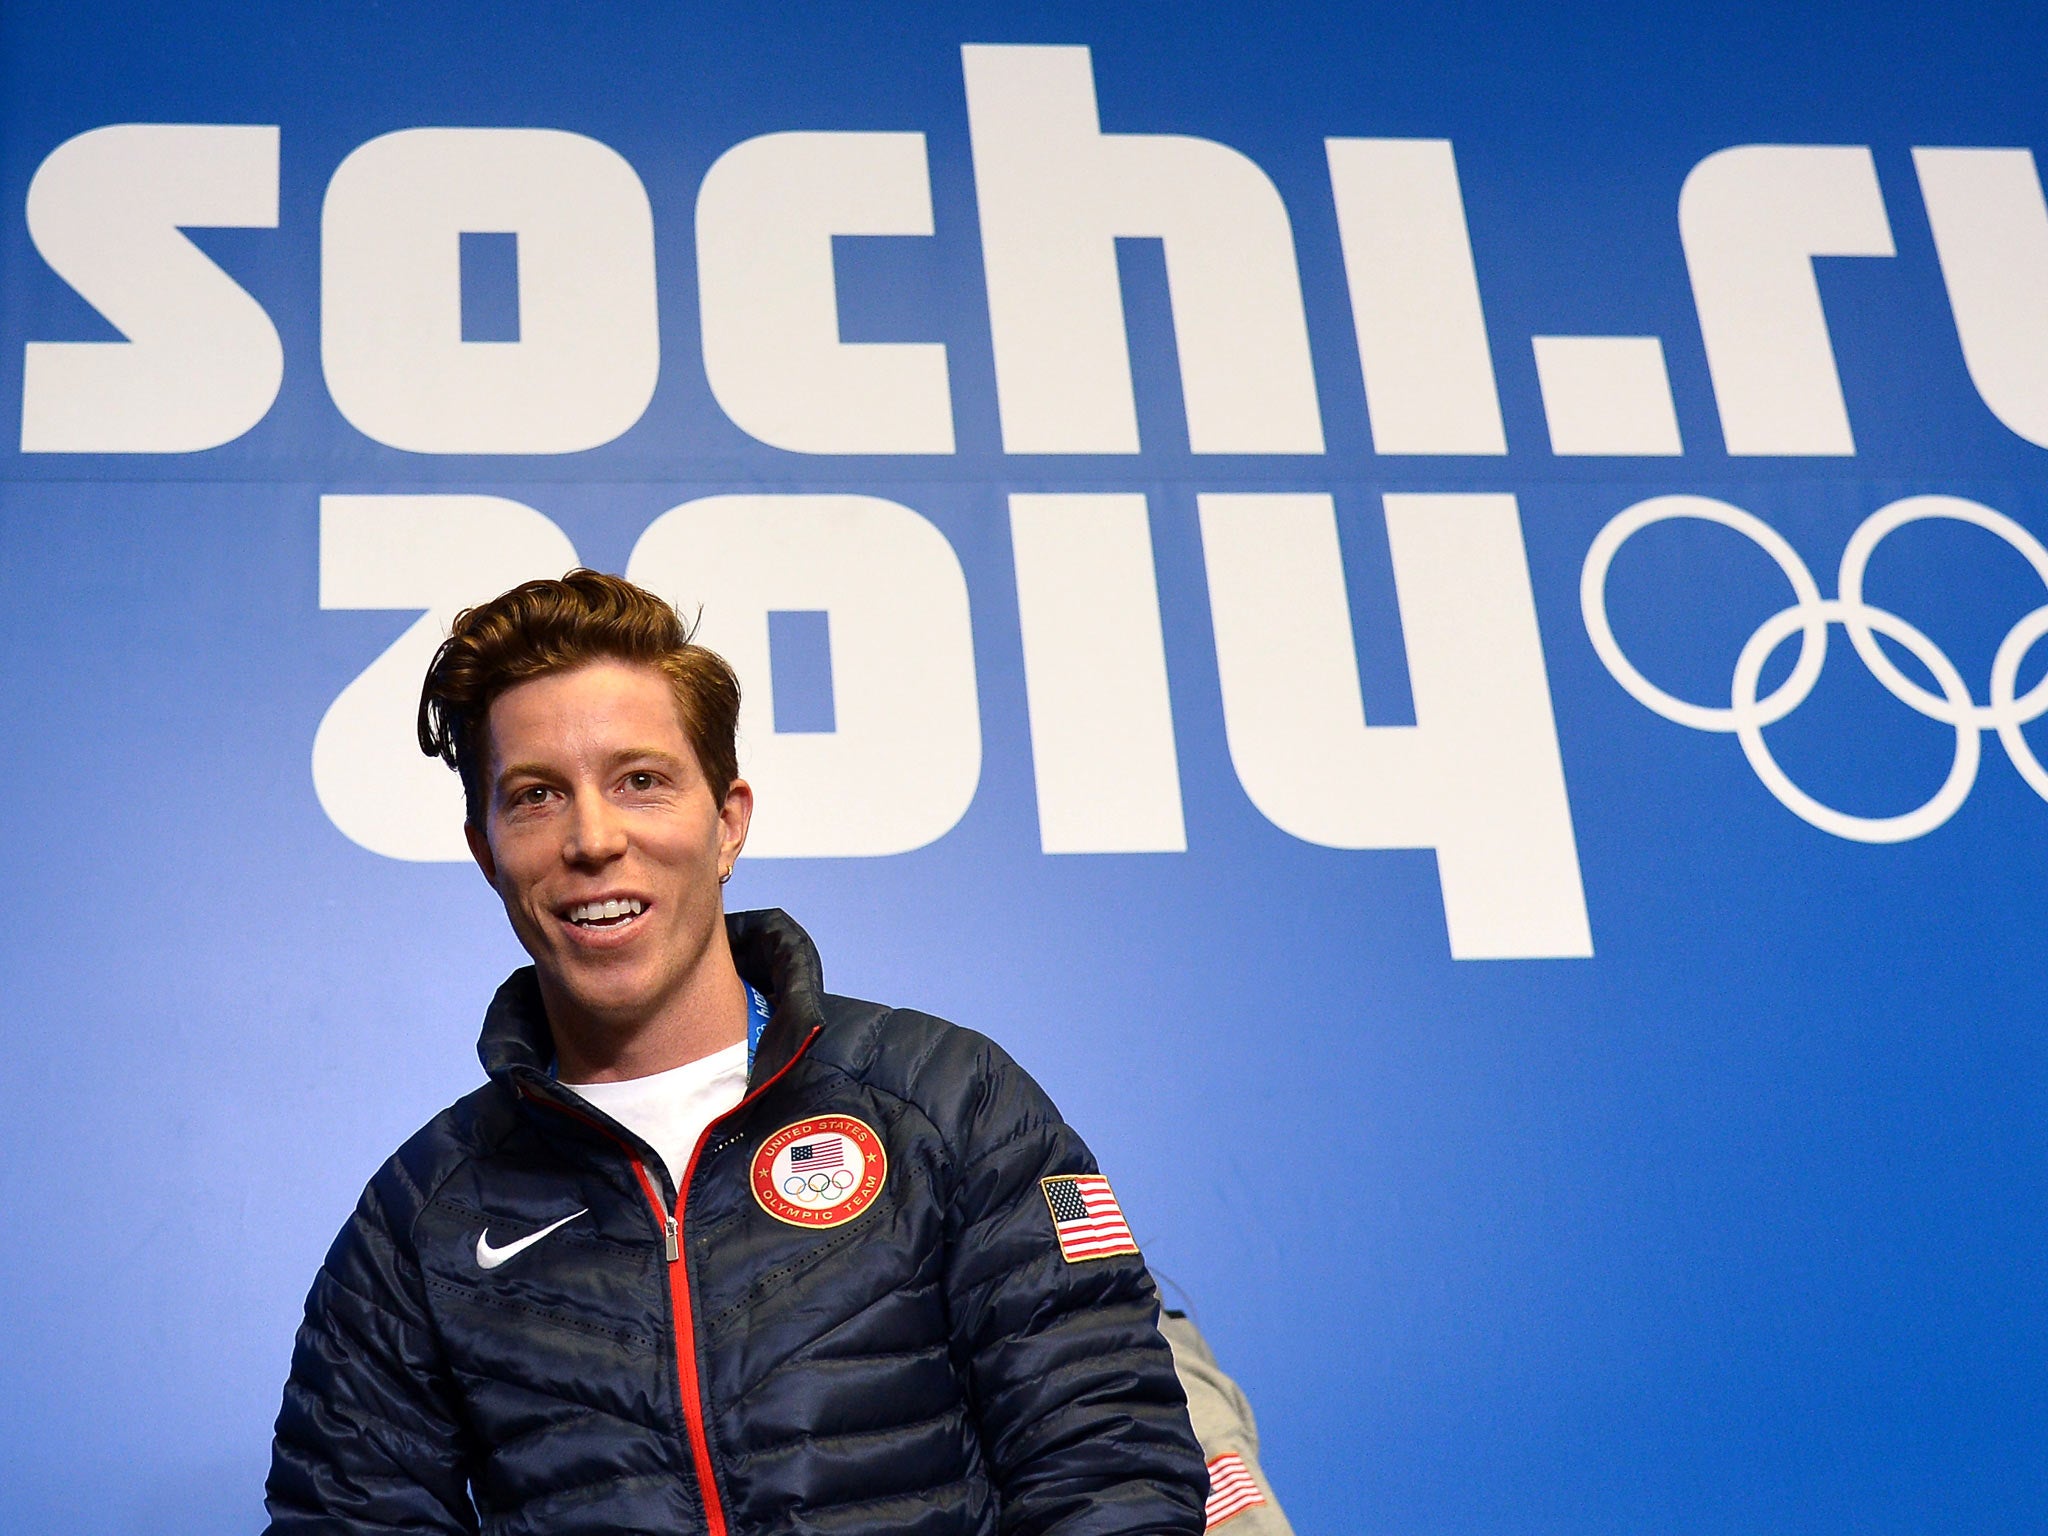 Shaun White pictured at the Sochi games